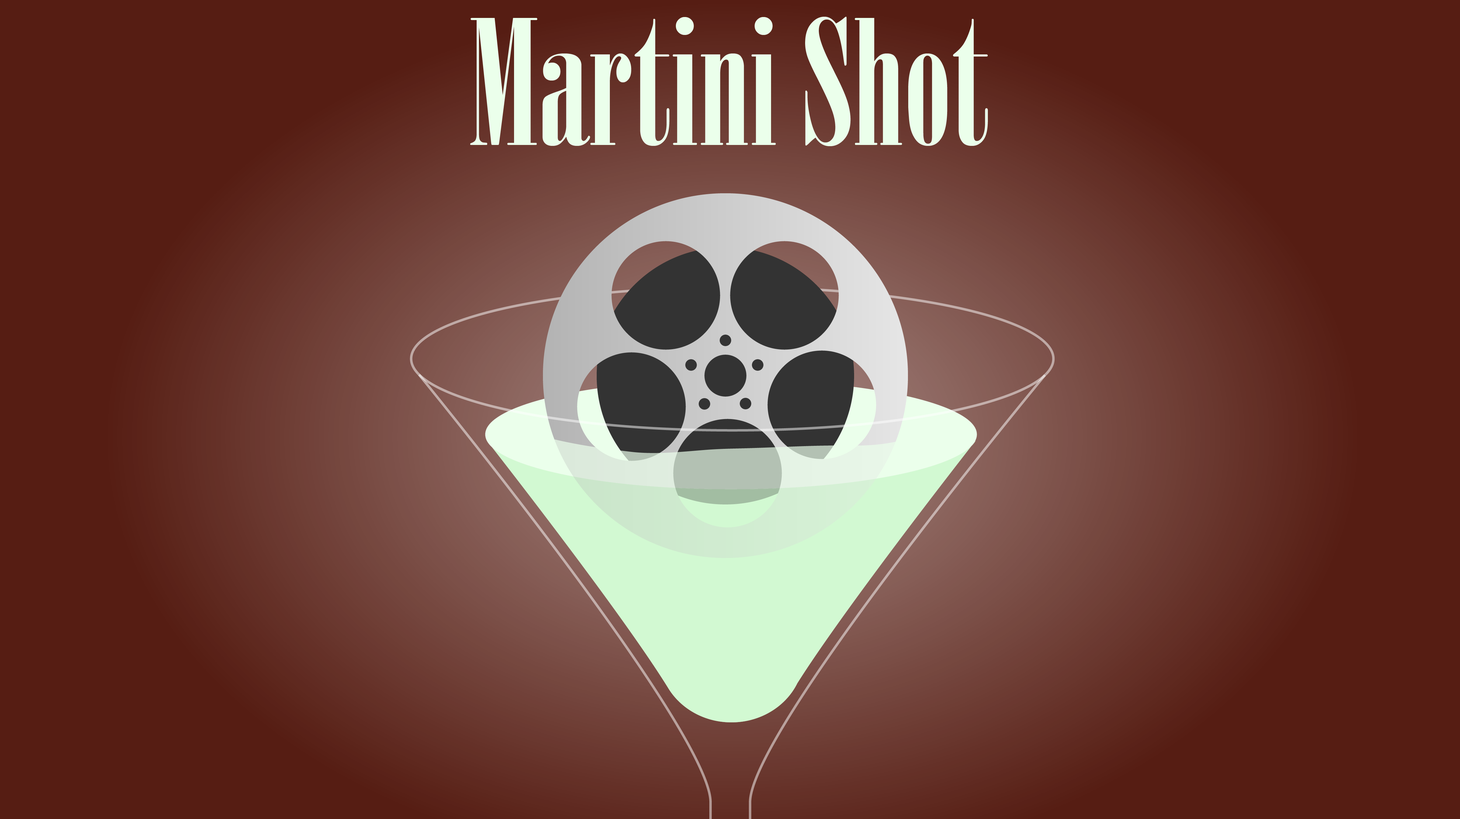 This is Rob Long and on today’s Martini Shot, I talk about the audience, which has been practicing a kind of social distancing since the moment Netfix started streaming — or, if you want to get deeper, since YouTube dot com turned on the juice.